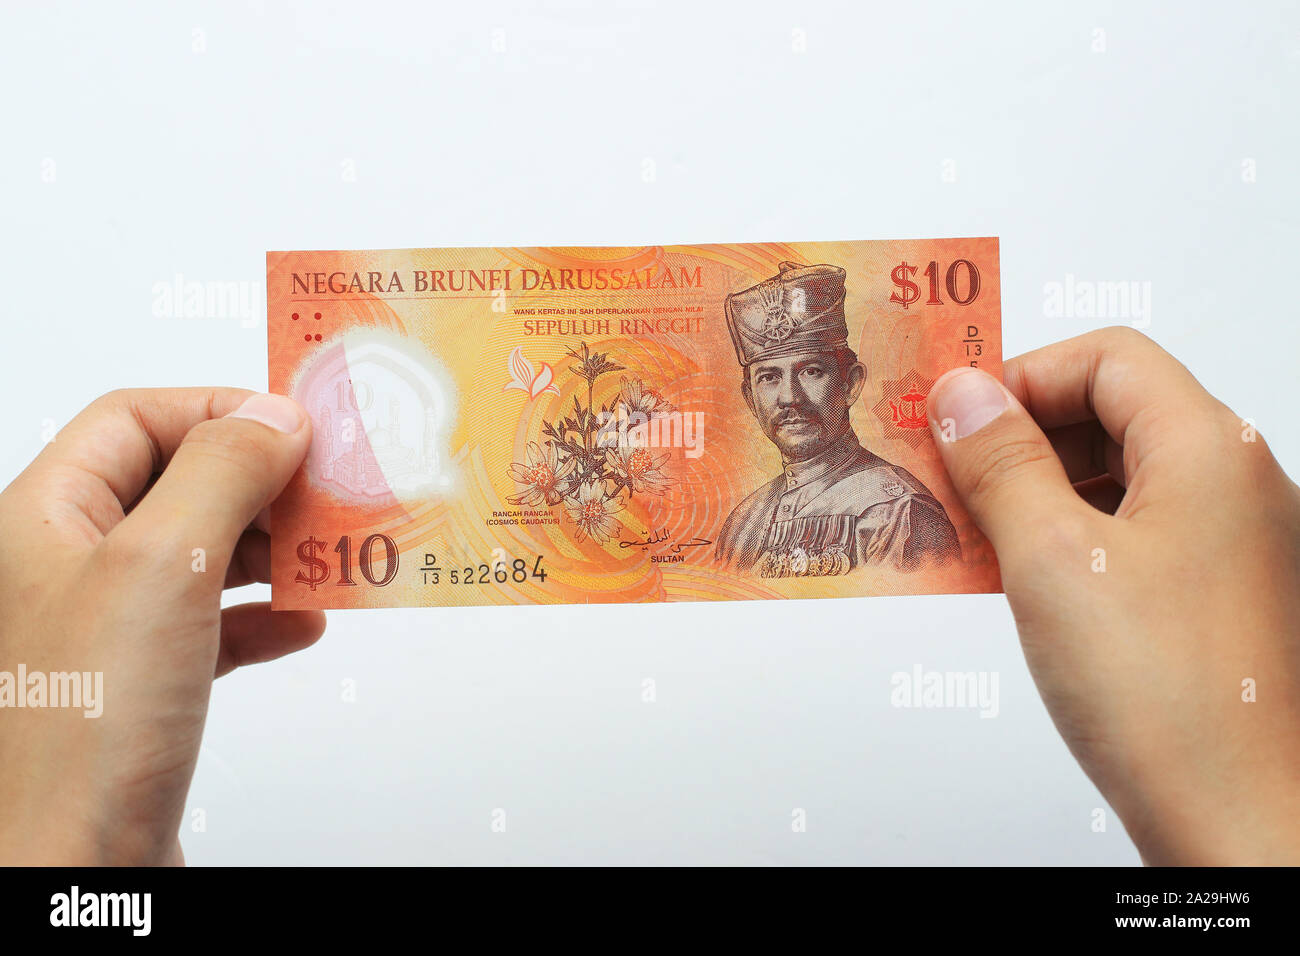 Brunei currency against white background Stock Photo